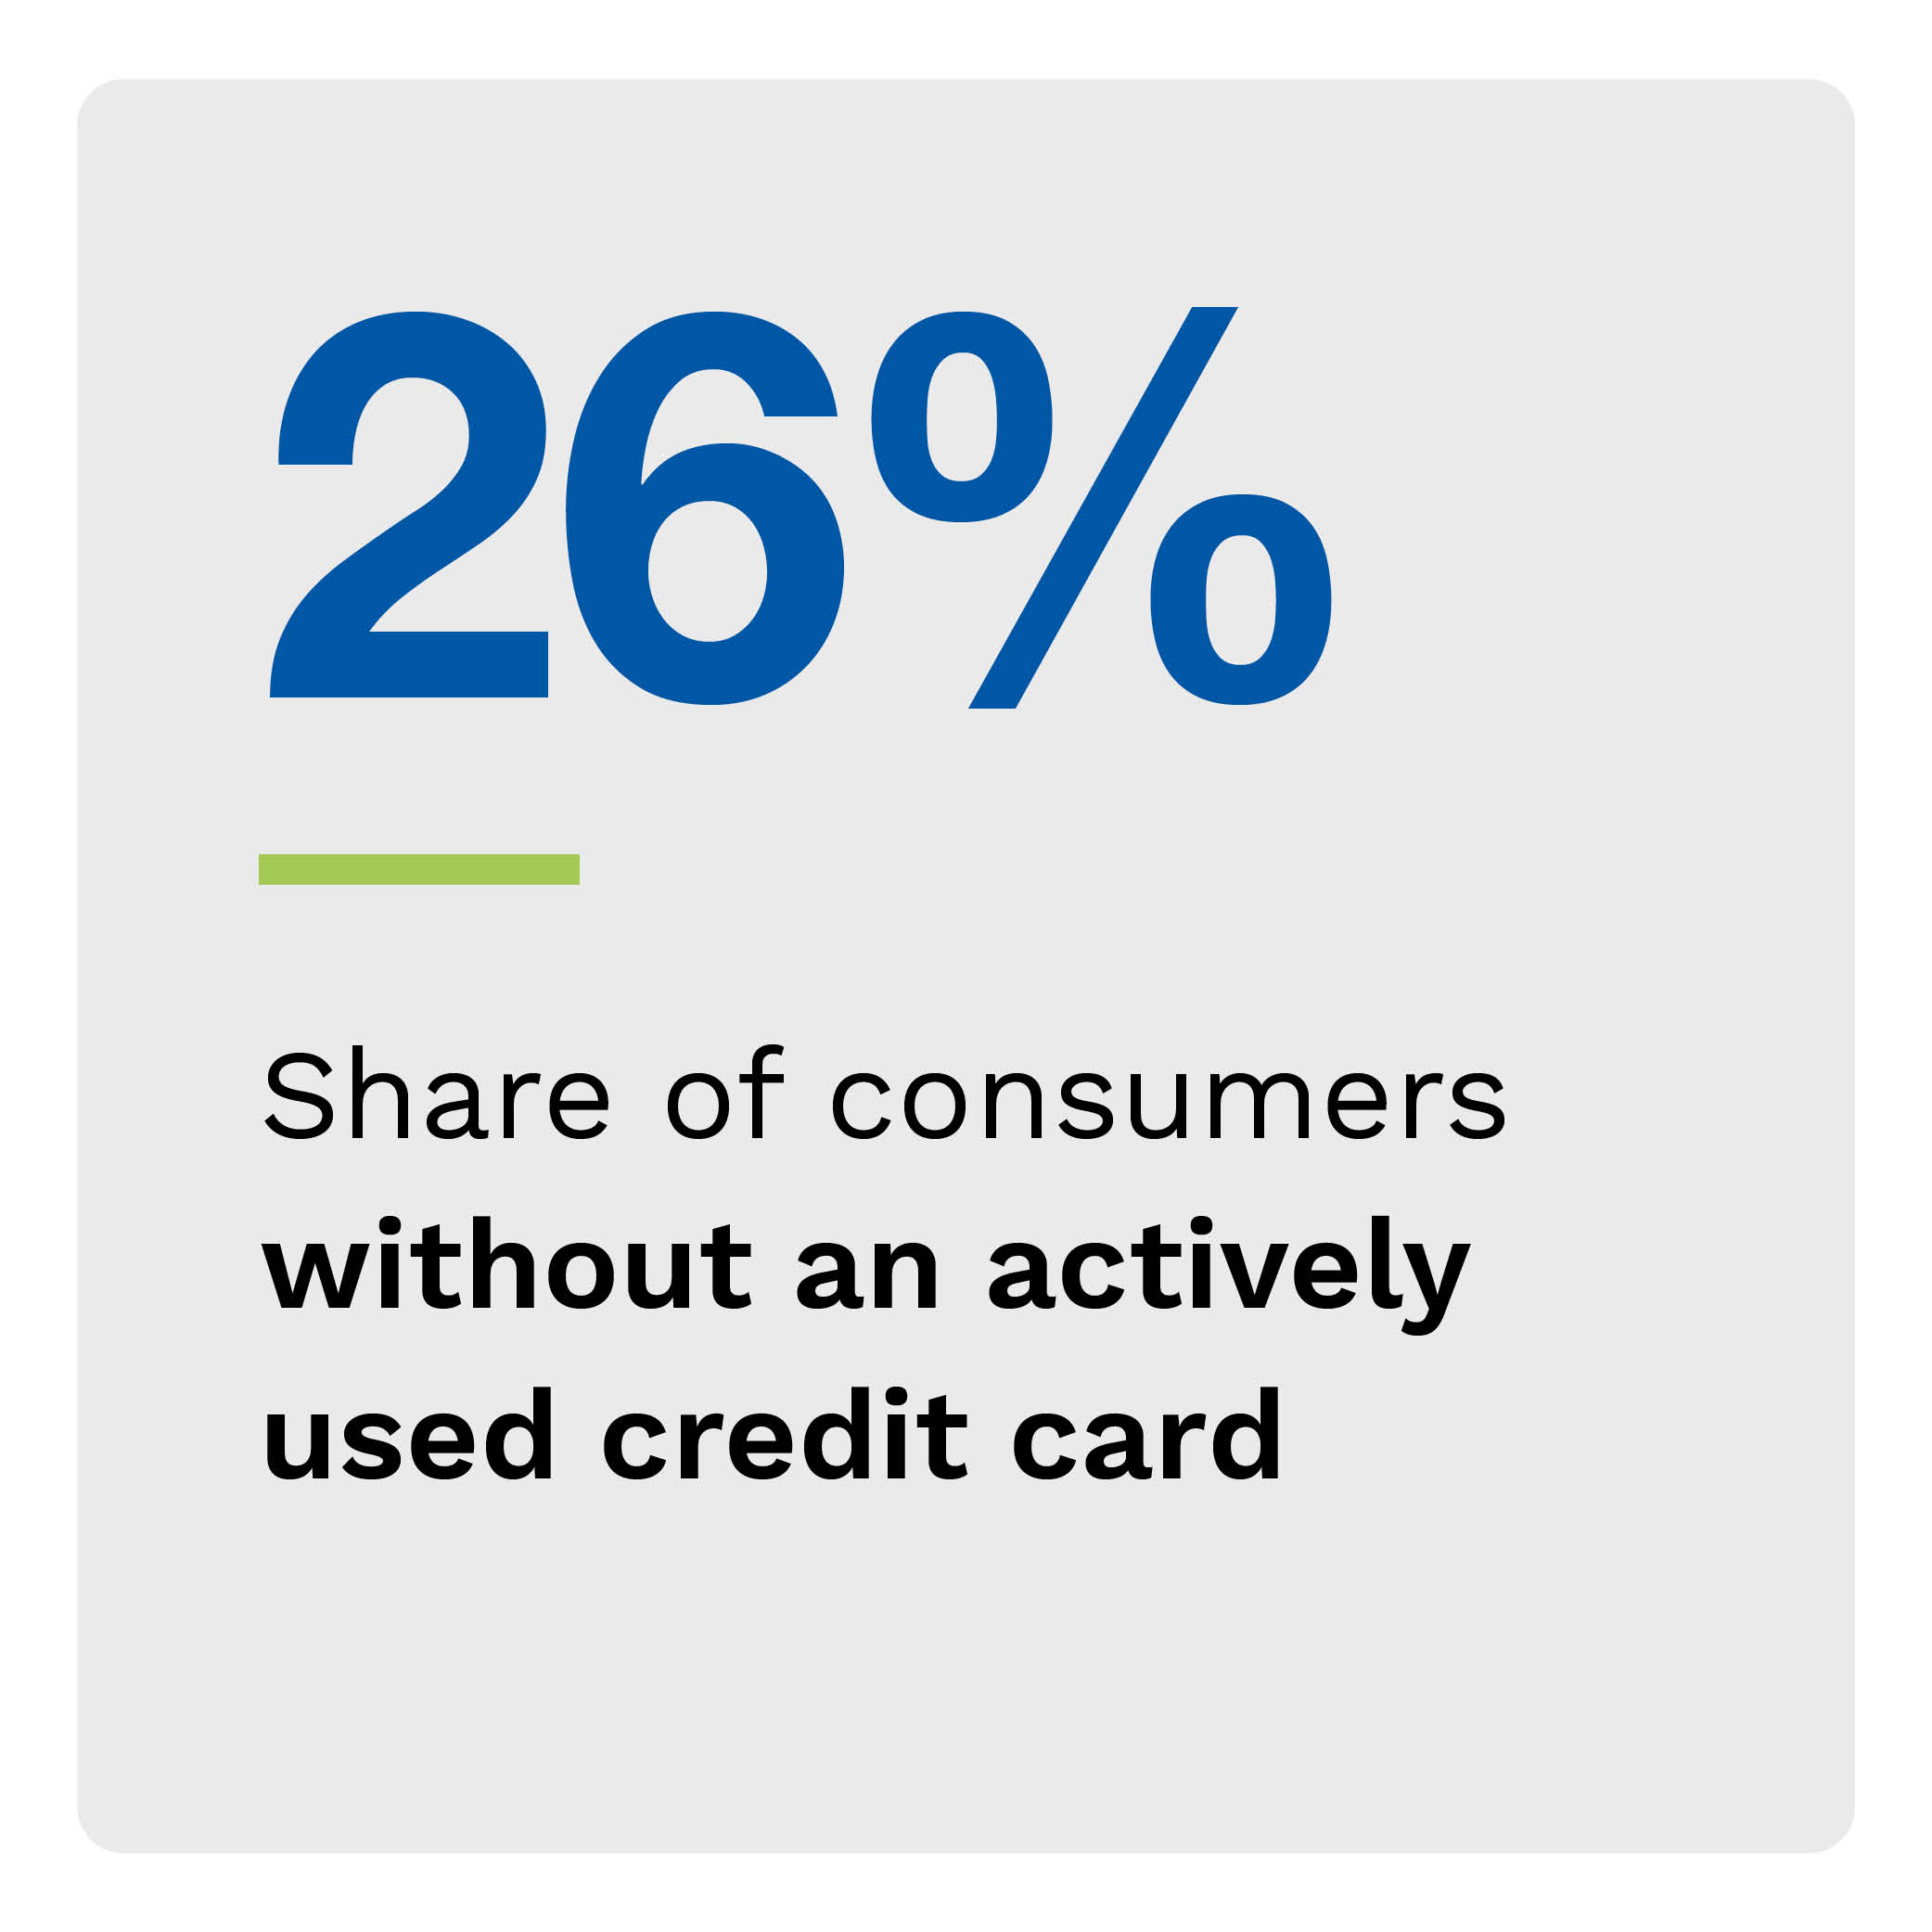 26%: Share of consumers without an actively used credit card